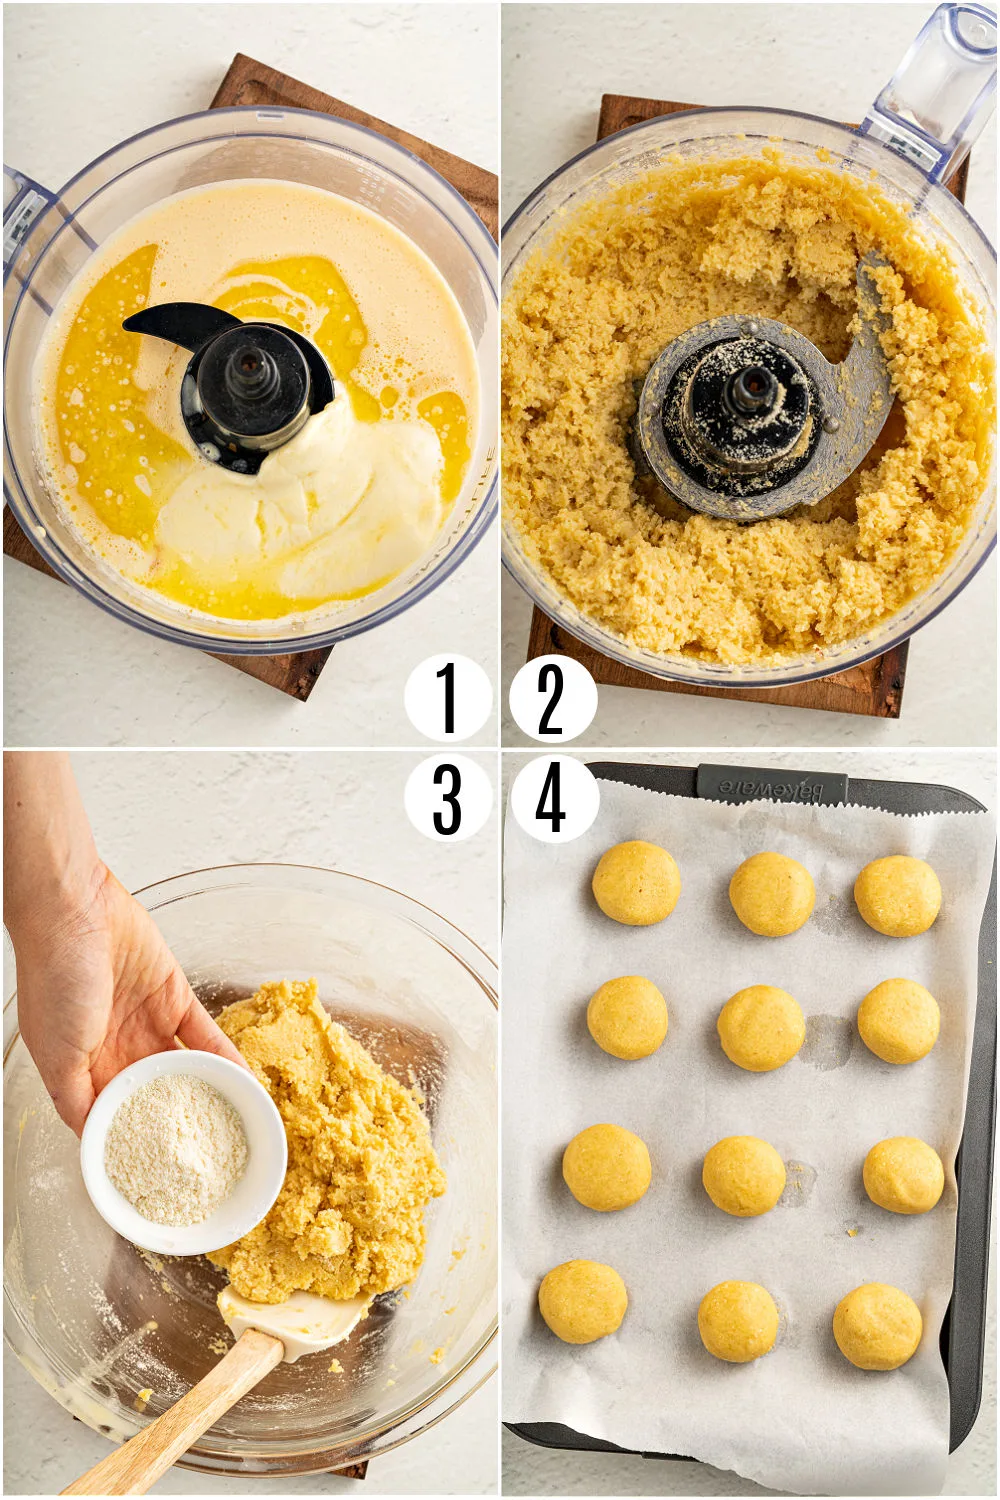 Step by step photos showing how to make keto burger buns.